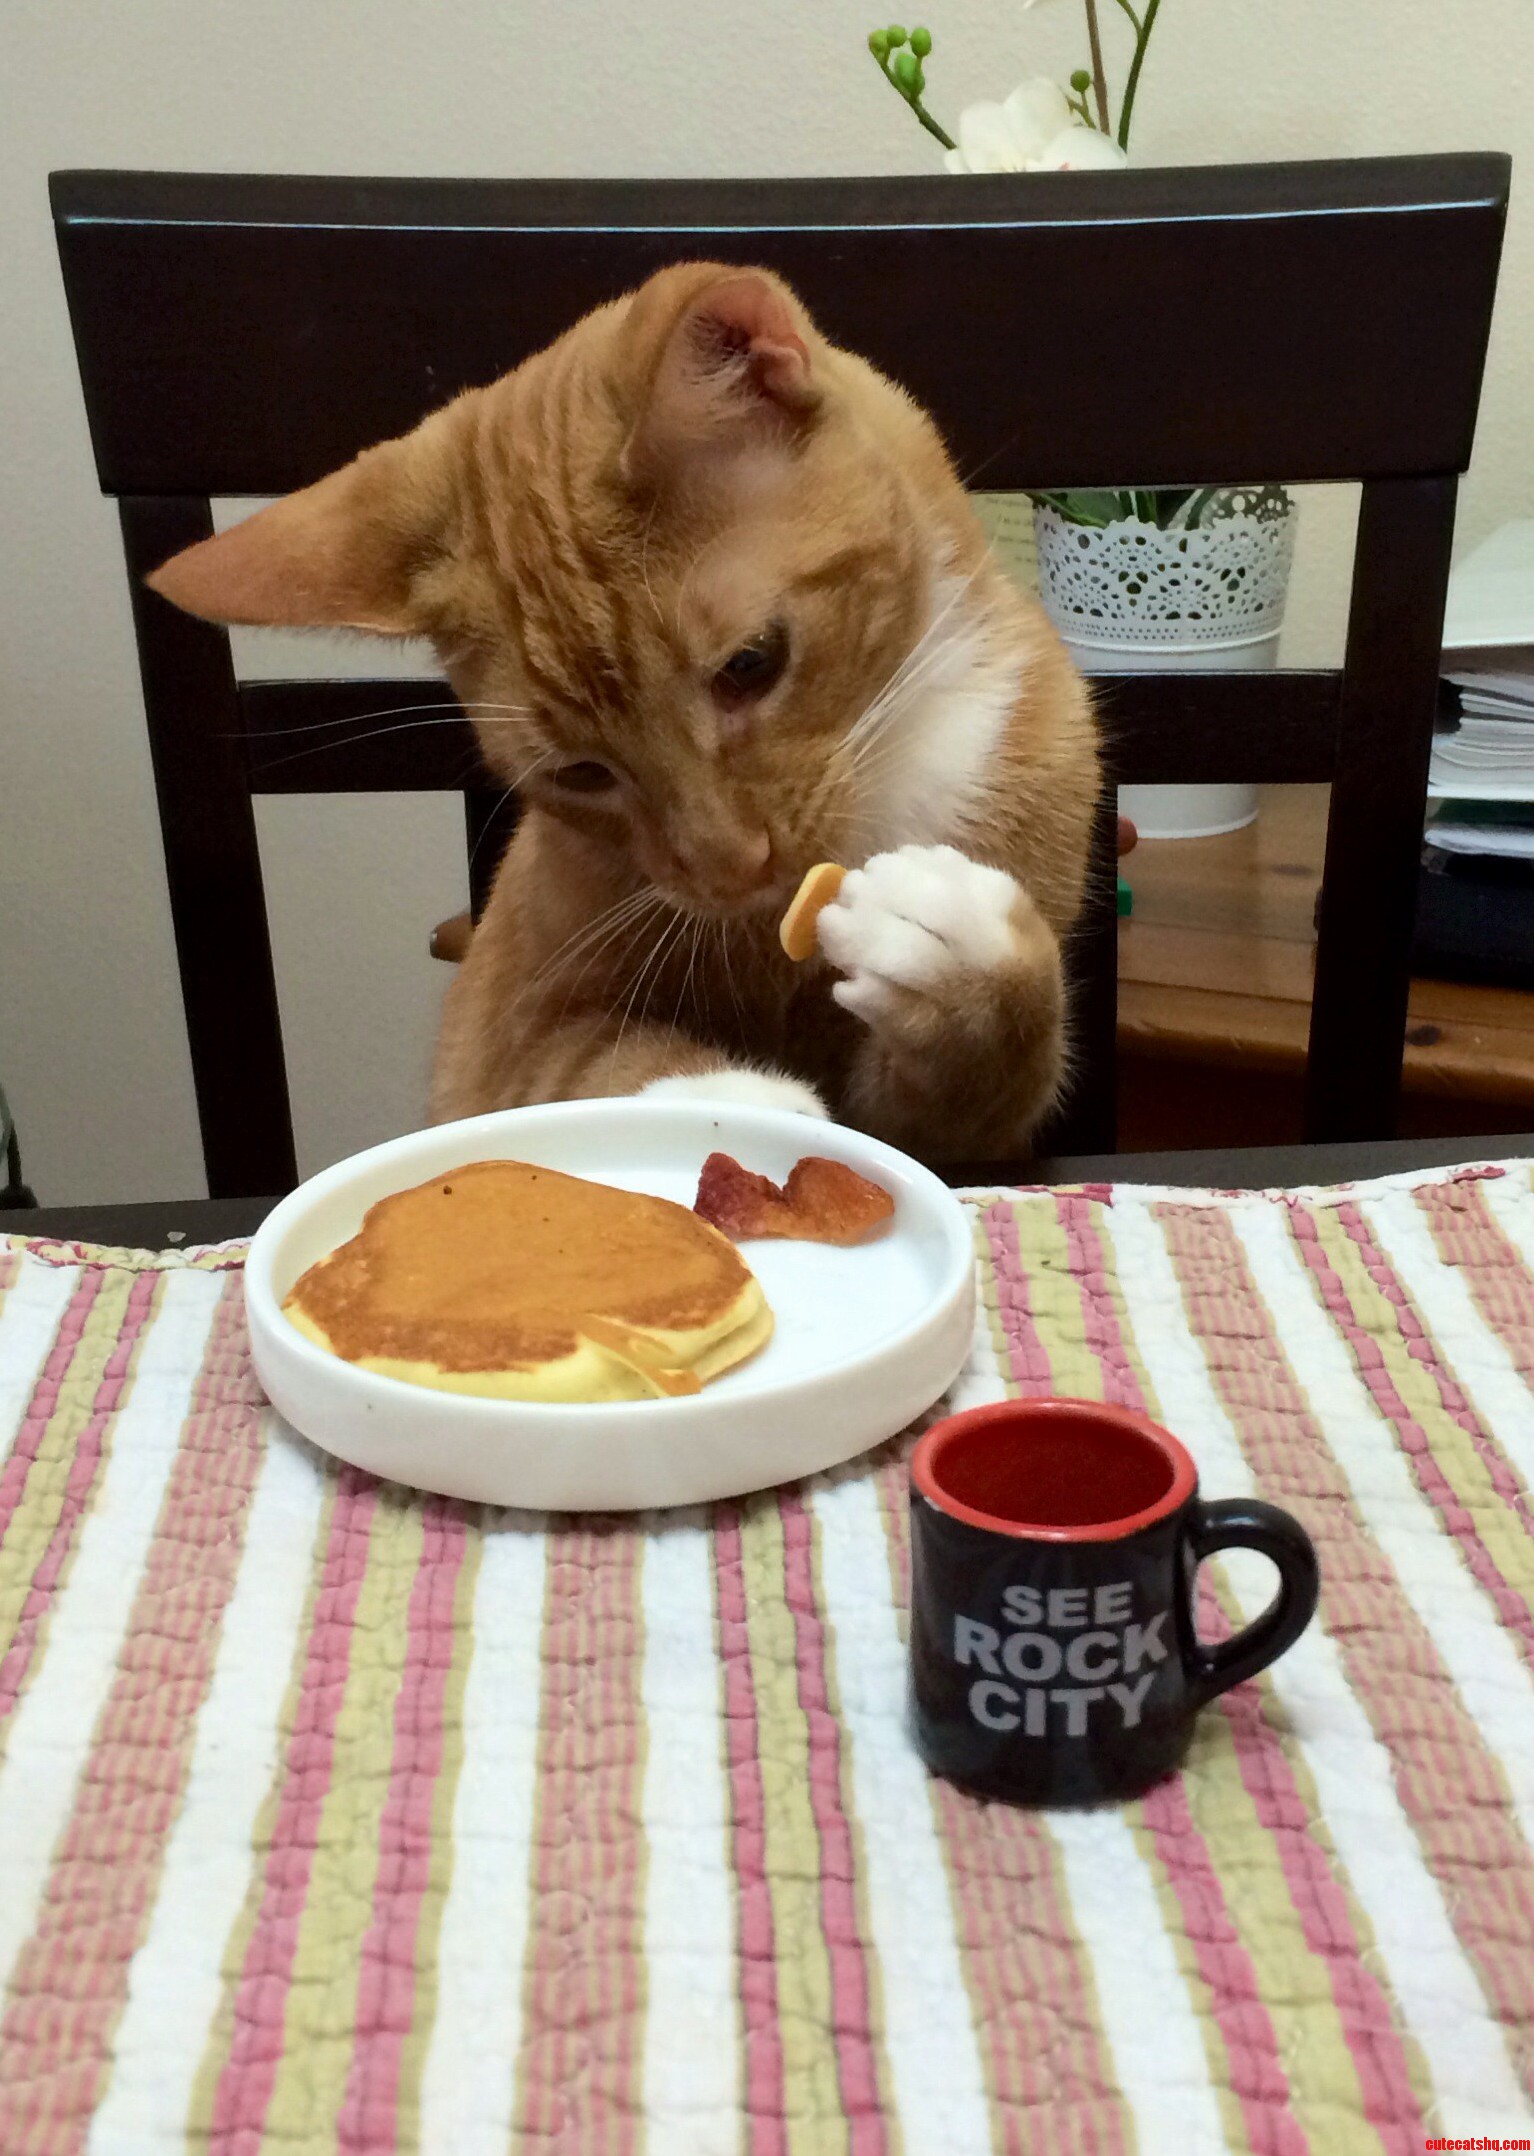 So My Sister Sent Me This Pic Of Her Cat Eating Breakfast.